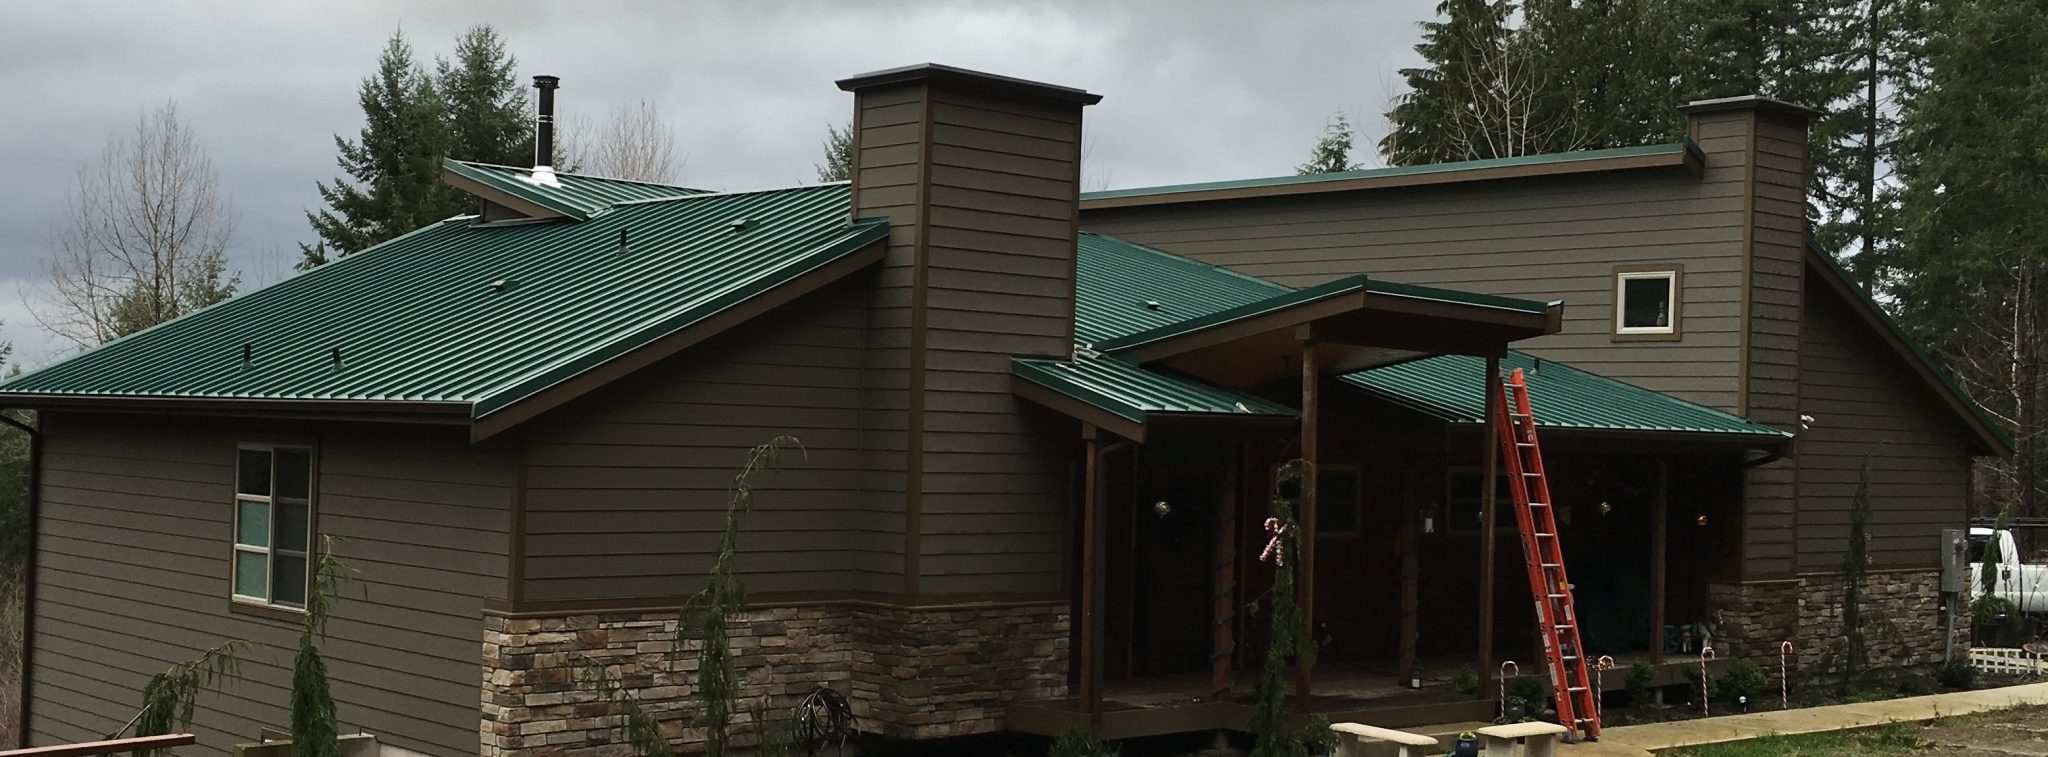 Snohomish Metal Roofing